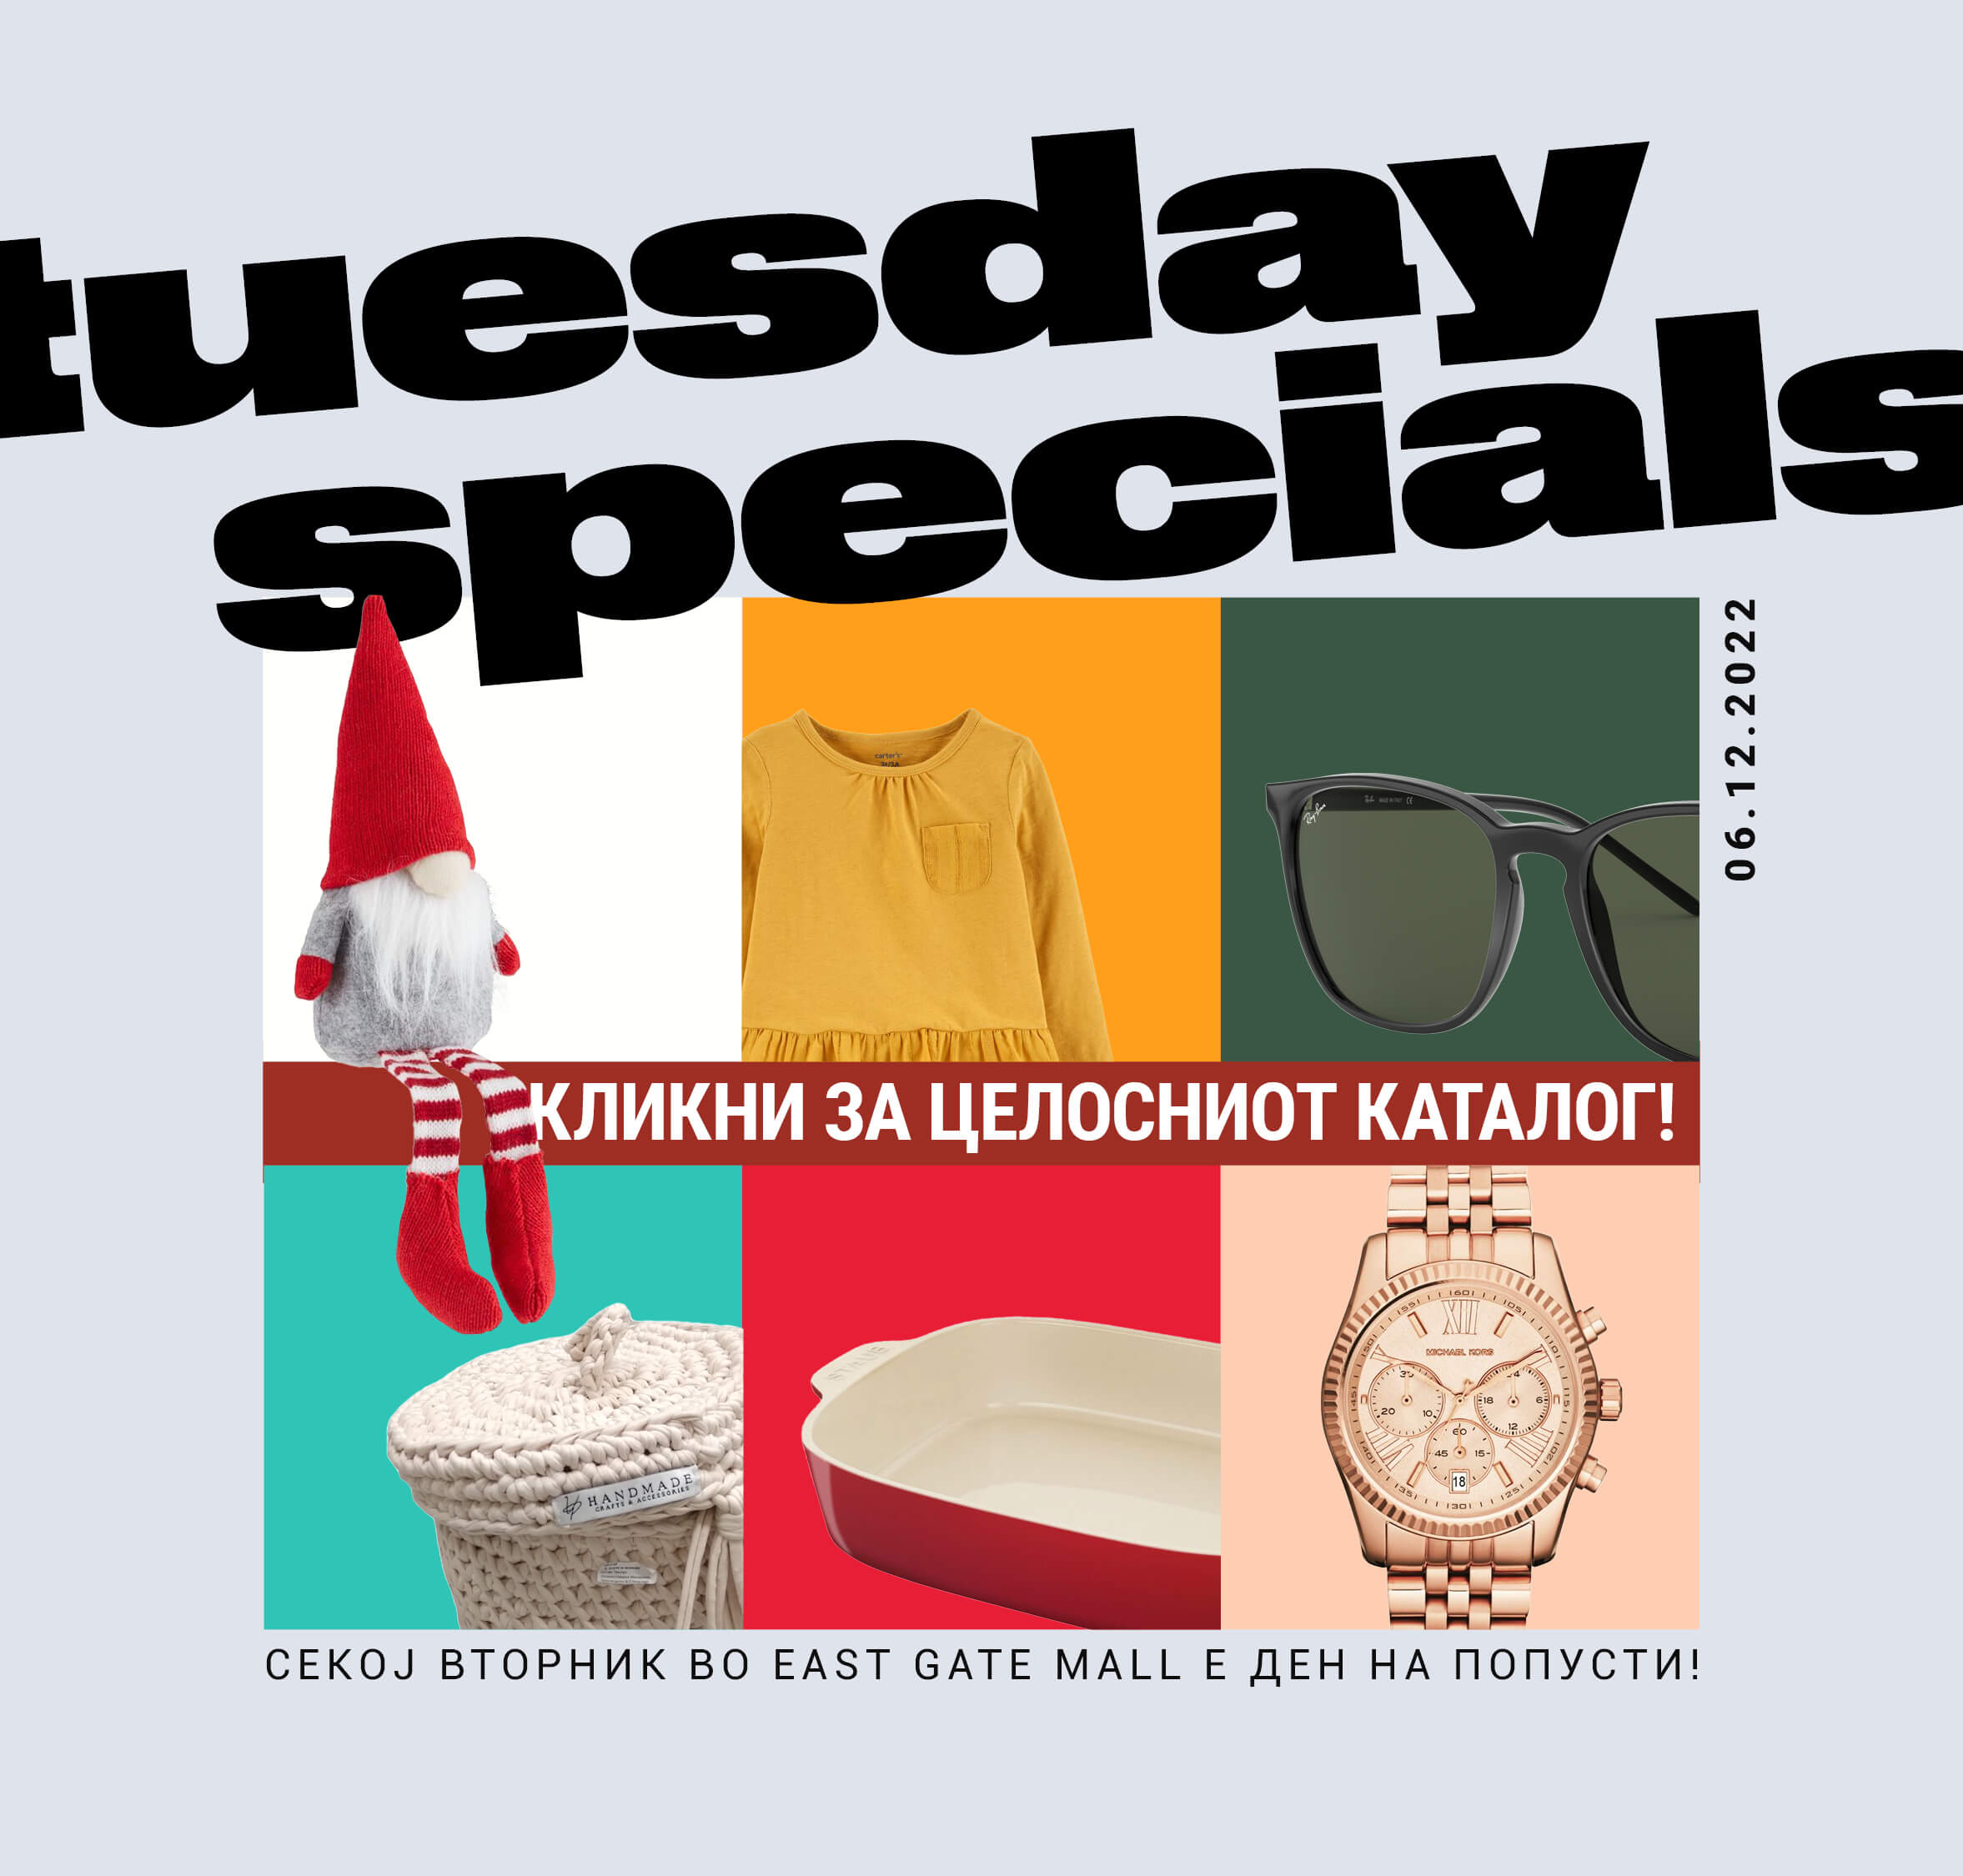 TUESDAY SPECIALS ВО EAST GATE MALL